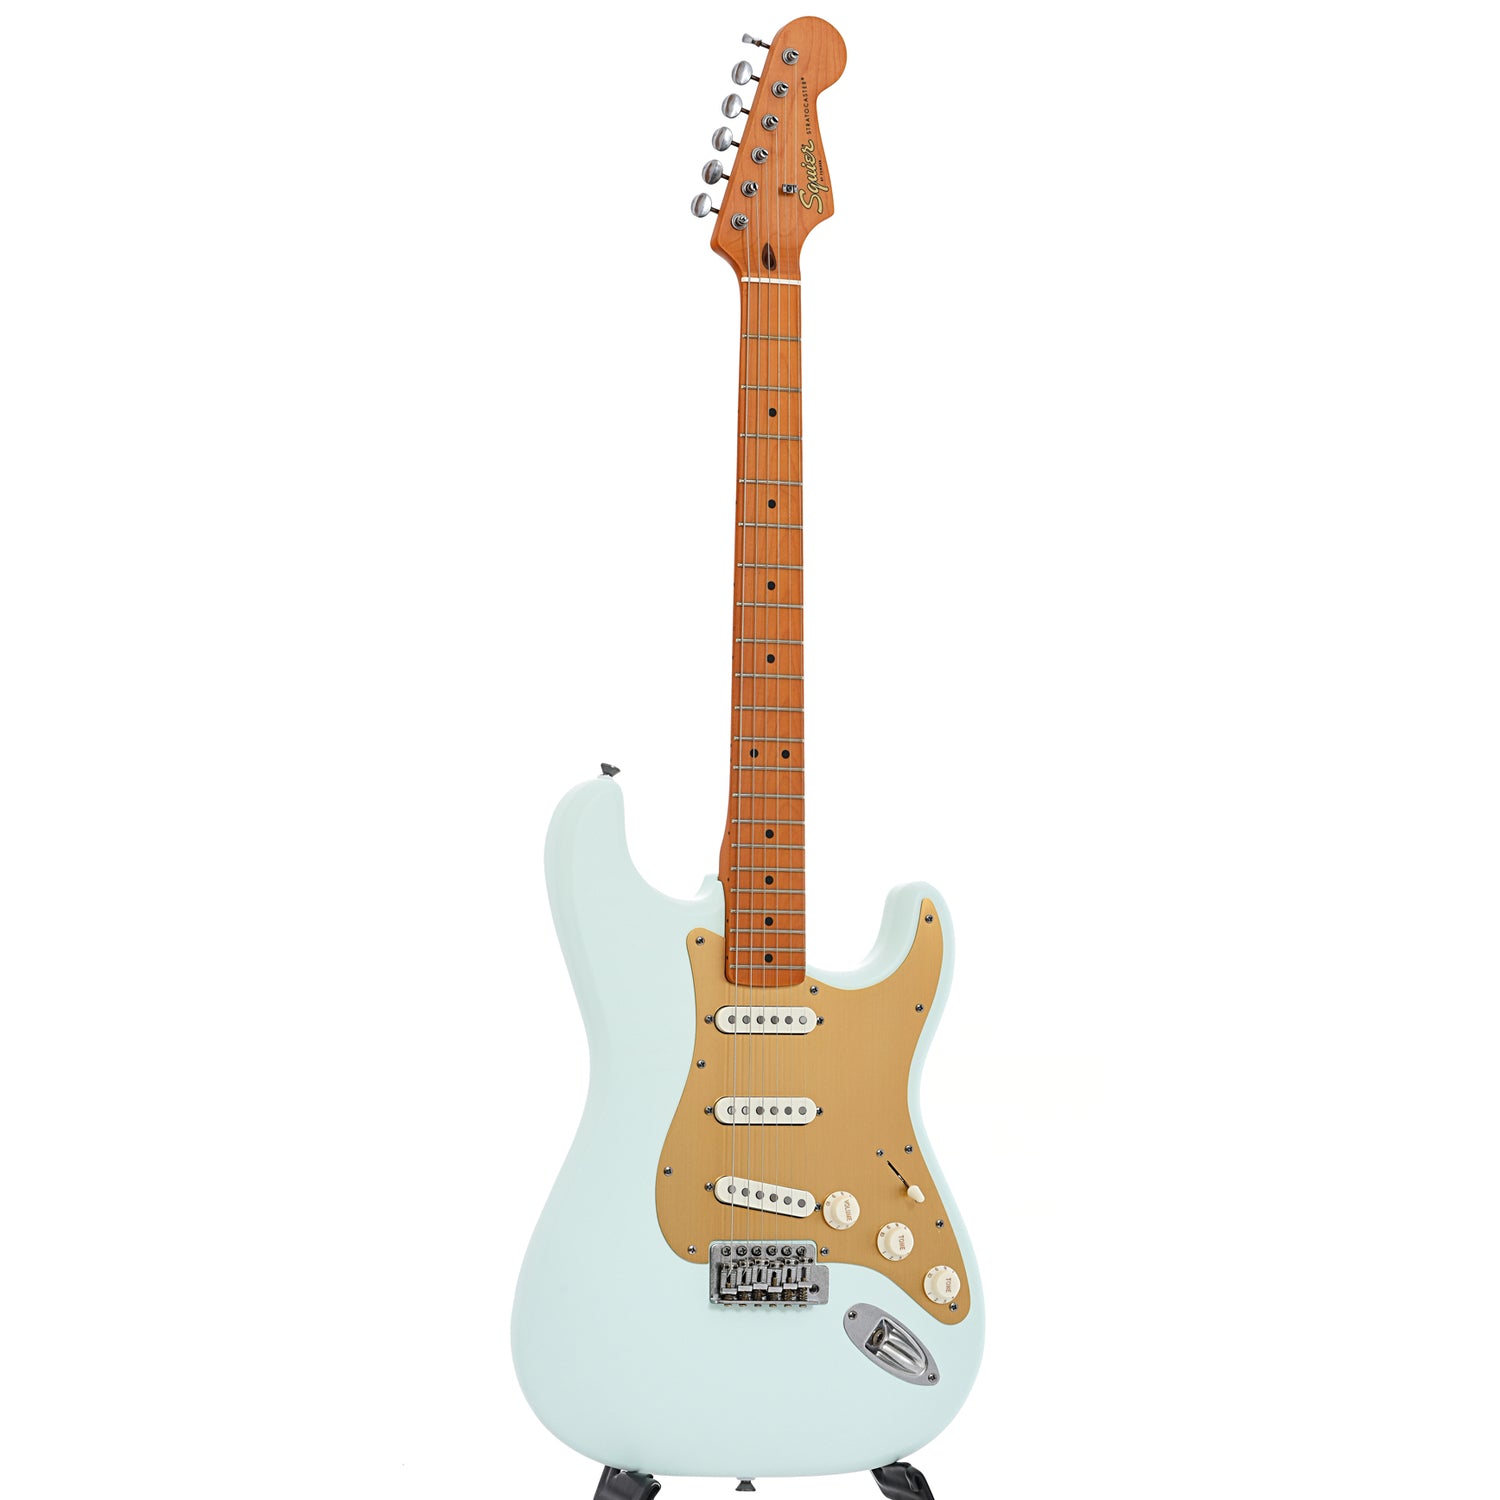 Full front and side of Squier 40th Anniversary Stratocaster, Vintage Edition, Satin Sonic Blue